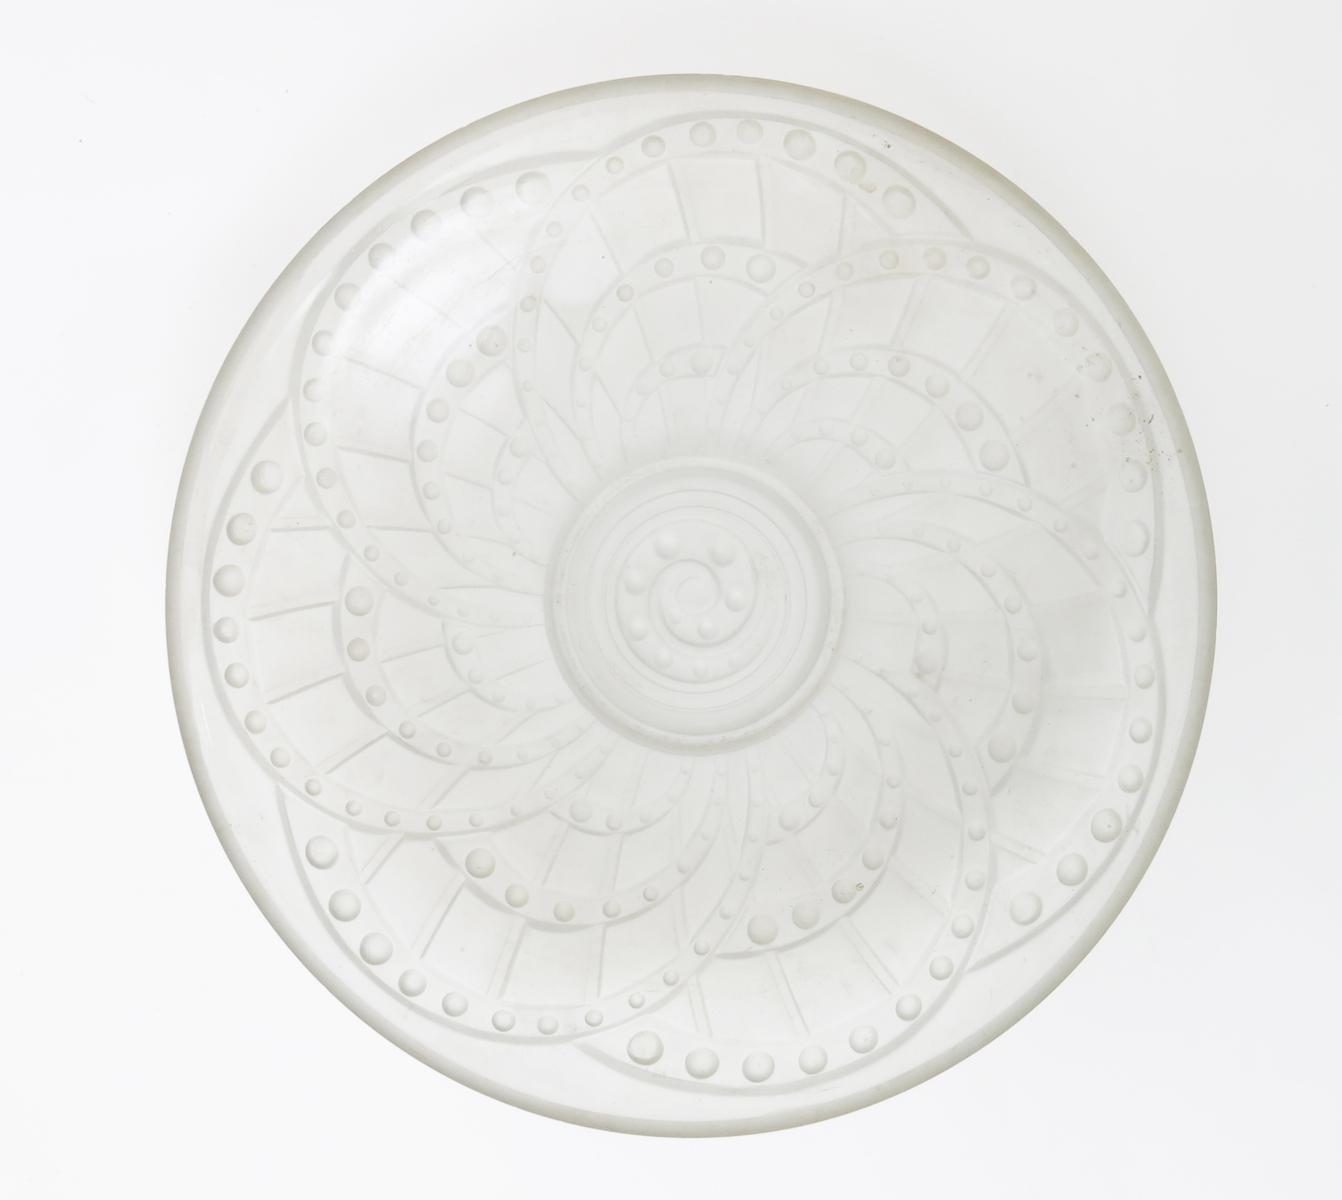 A Landier opalescent glass dish, moulded in low relief with radiating geometric swirls, an - Image 2 of 3